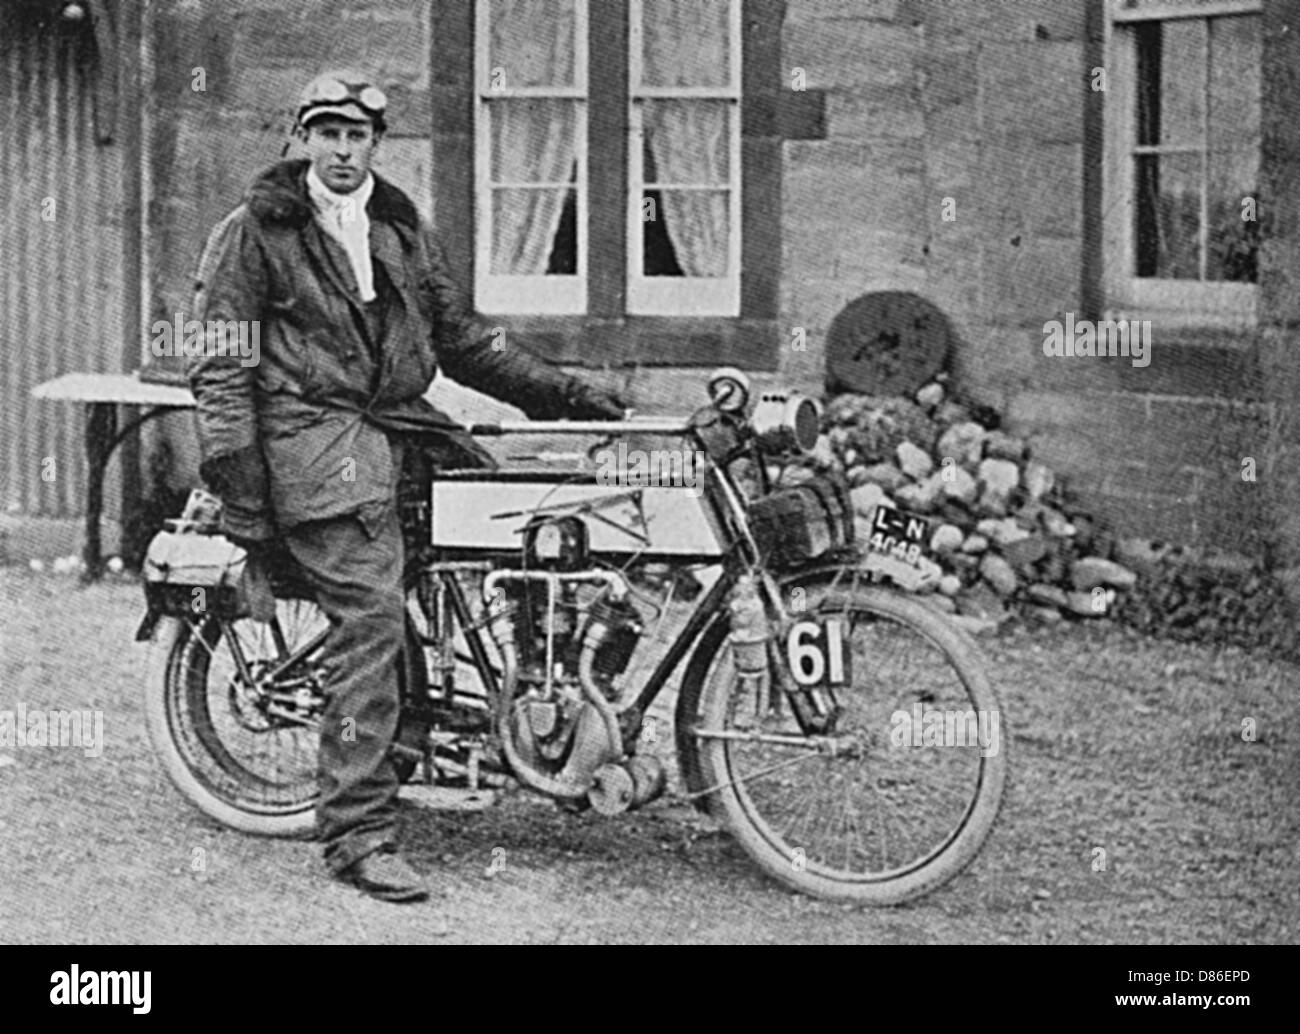 Anthony Wilding On A Motorcycle Tour Of The Uk Stock Photo